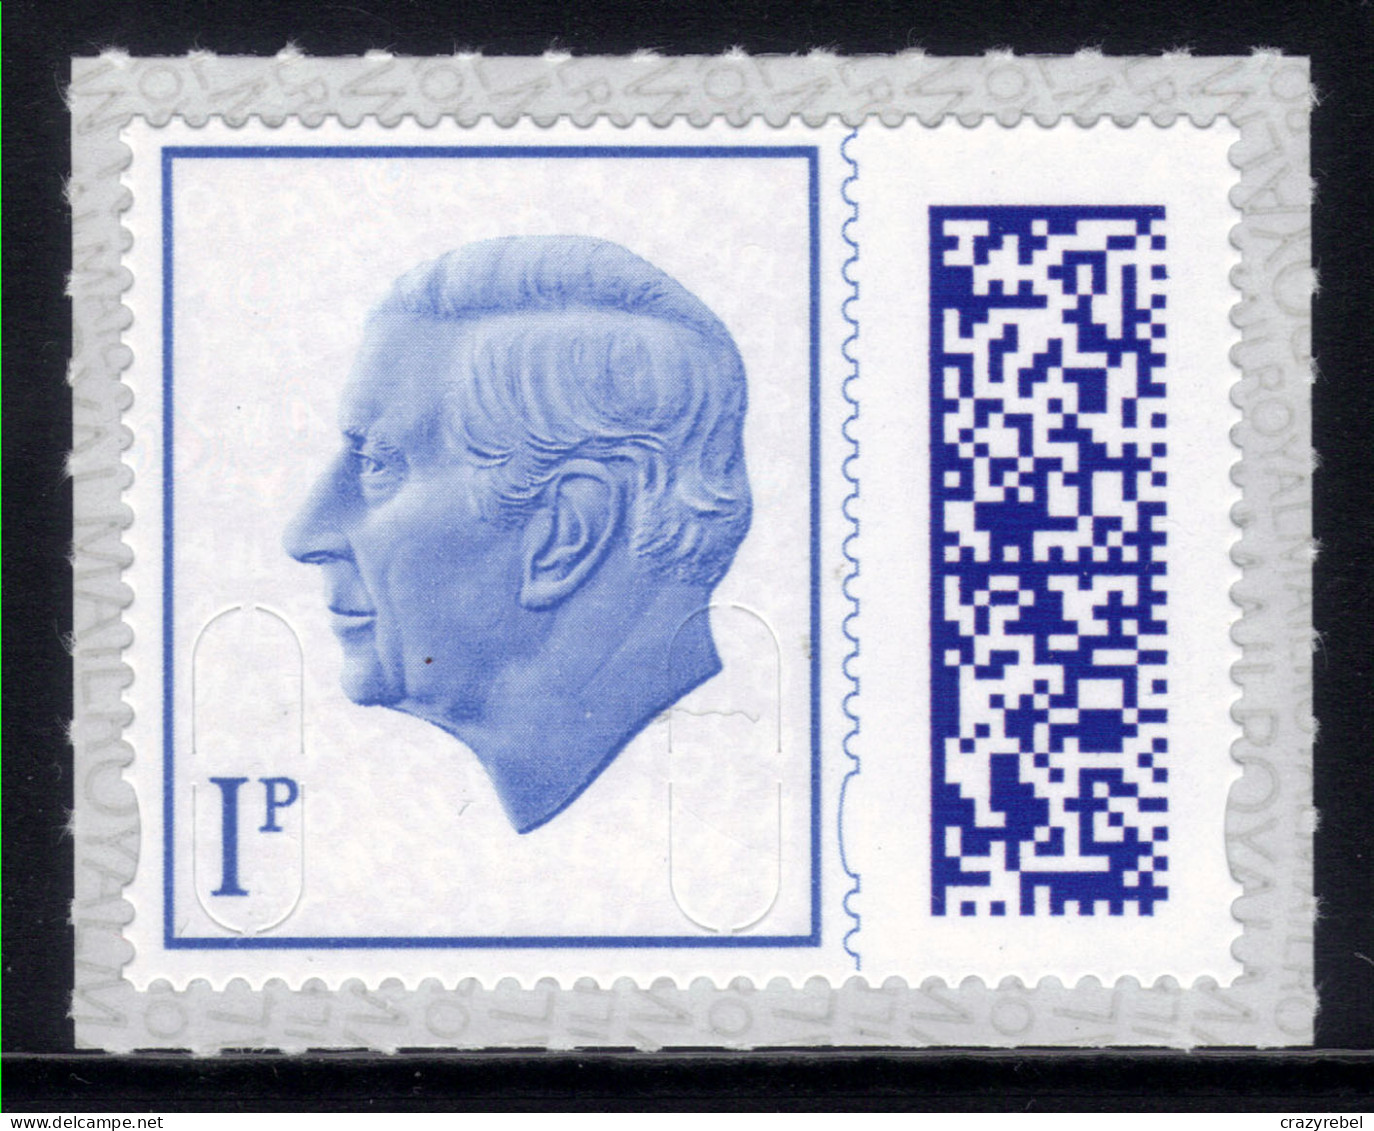 GB 2023 KC 3rd 1p Blue Barcoded Machin Umm MAIL ( M593 ) - Unused Stamps